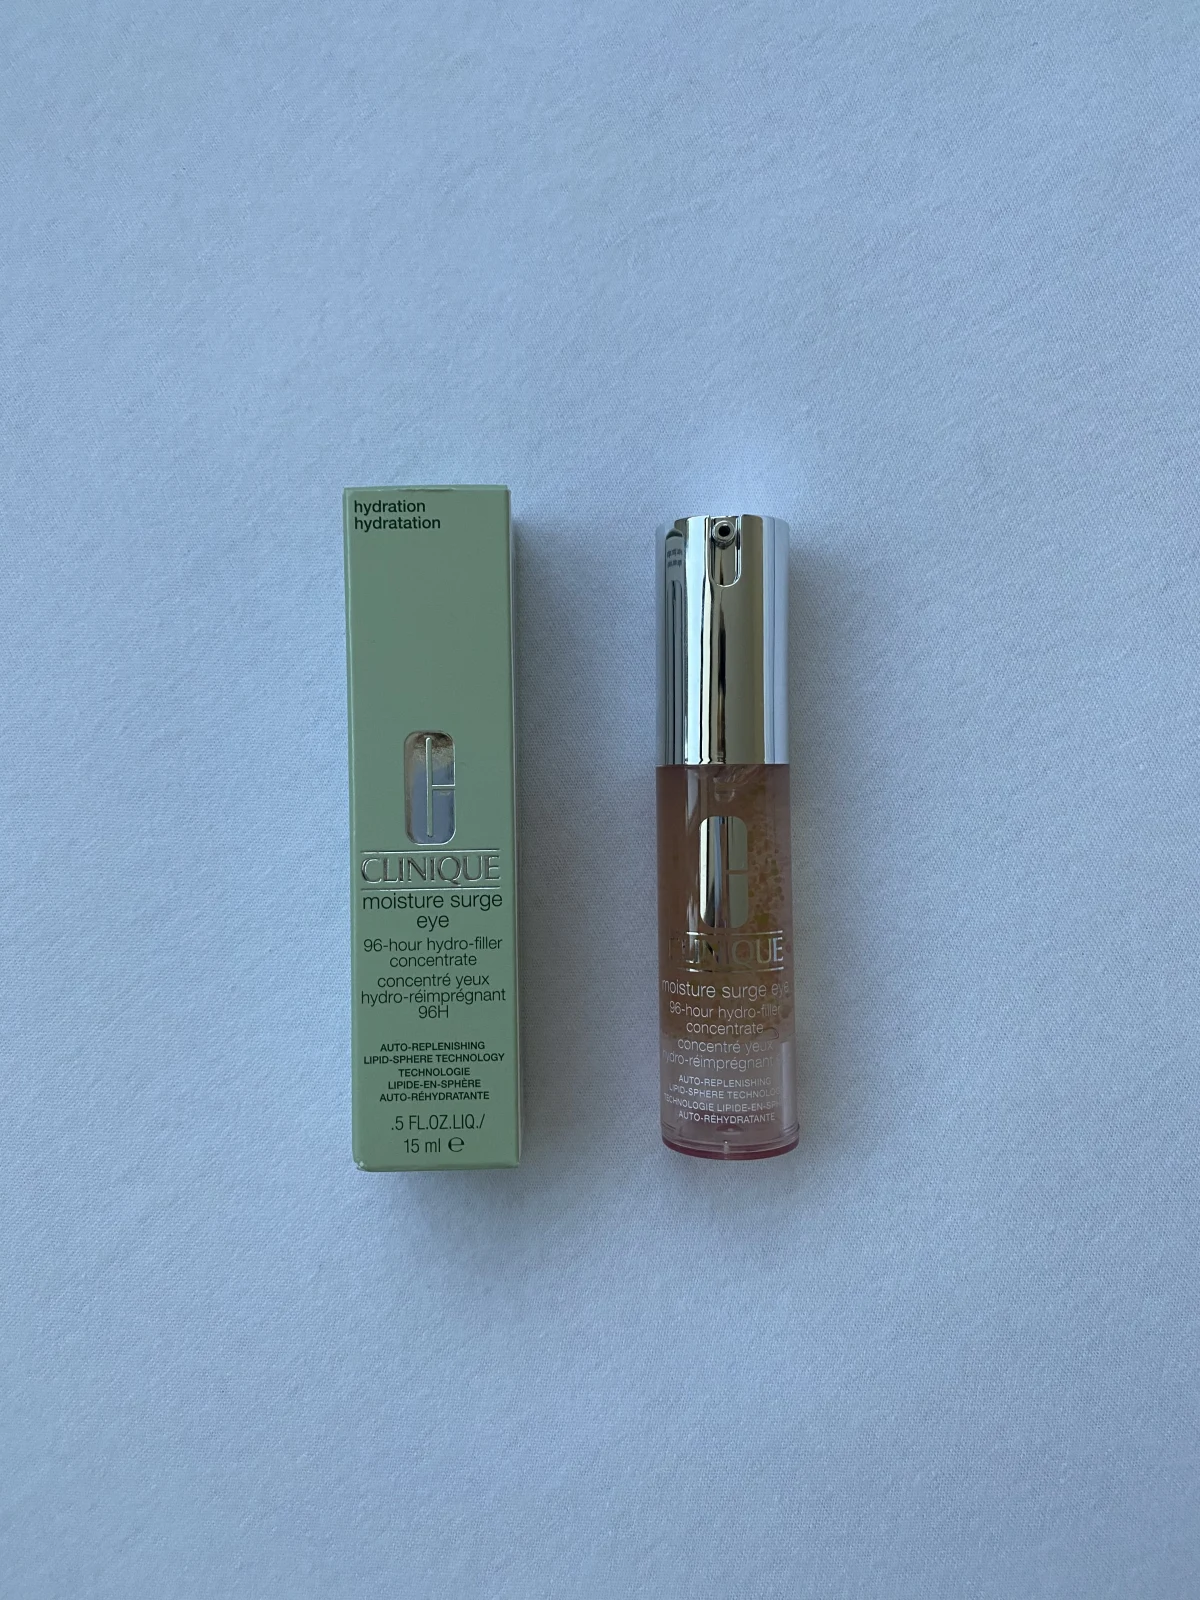 Moisture Surge Eye 96-hour hydro-filler concentrate - oogserum - review image